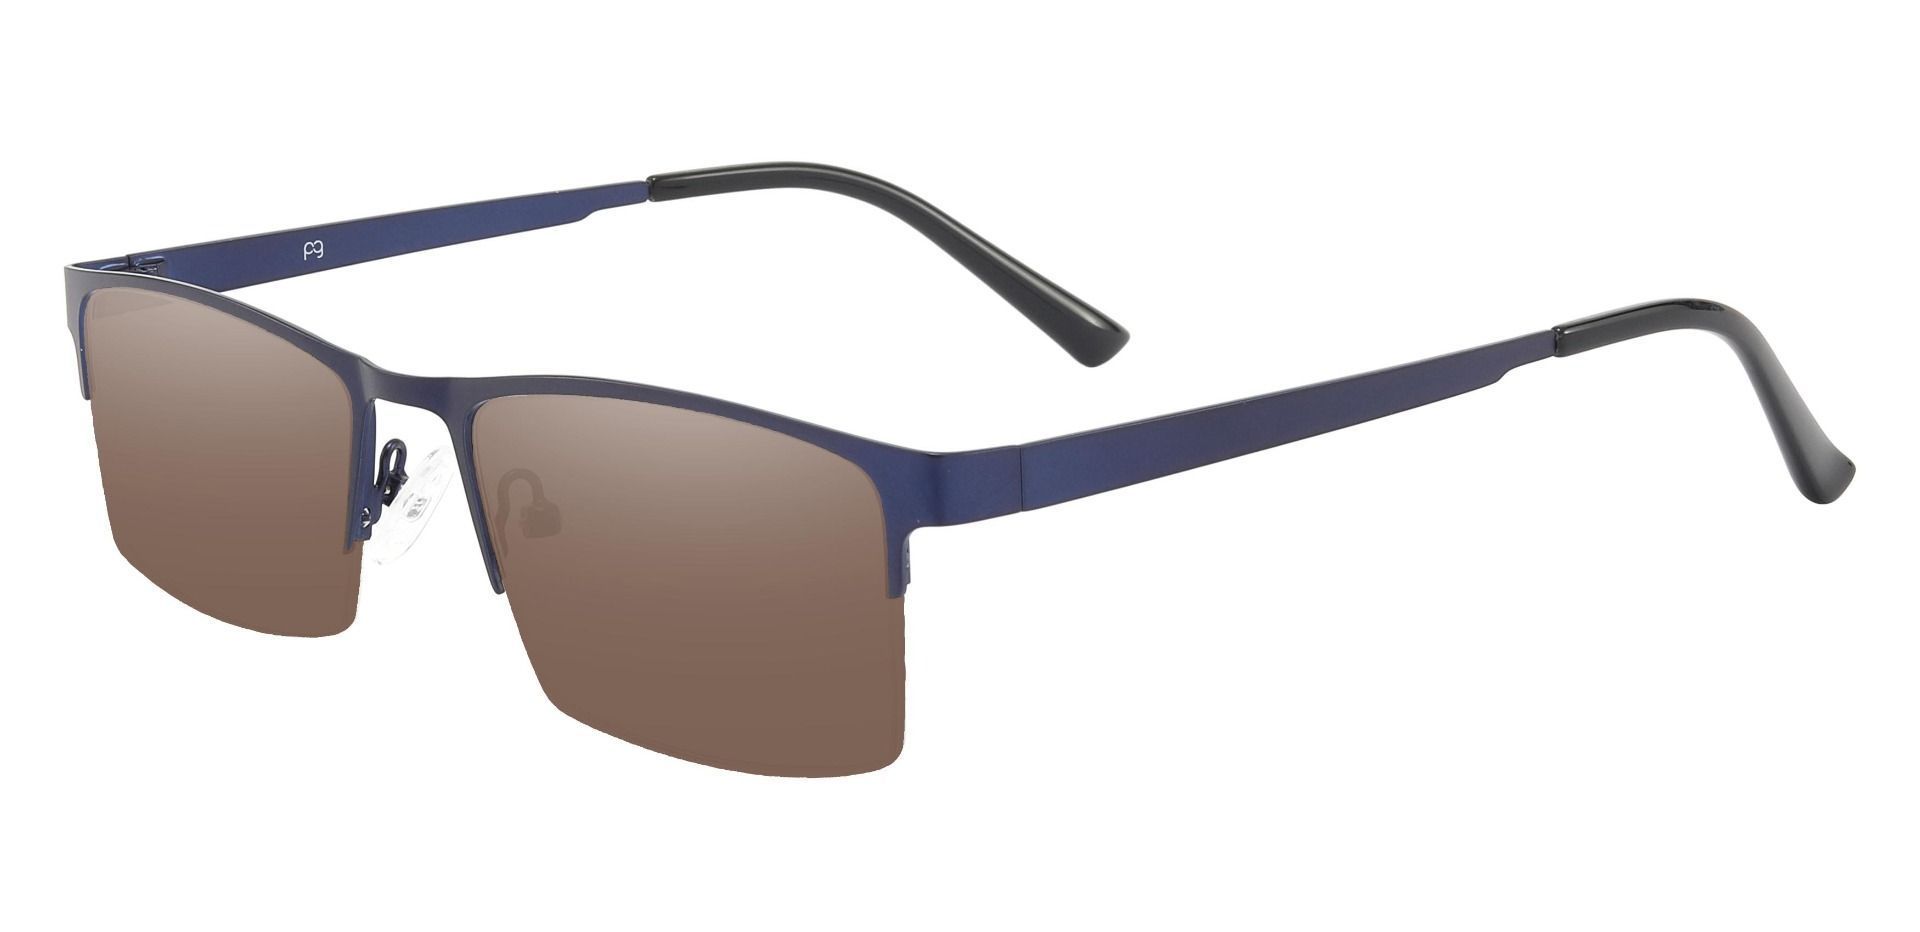 Patrick Rectangle Lined Bifocal Sunglasses - Blue Frame With Brown Lenses